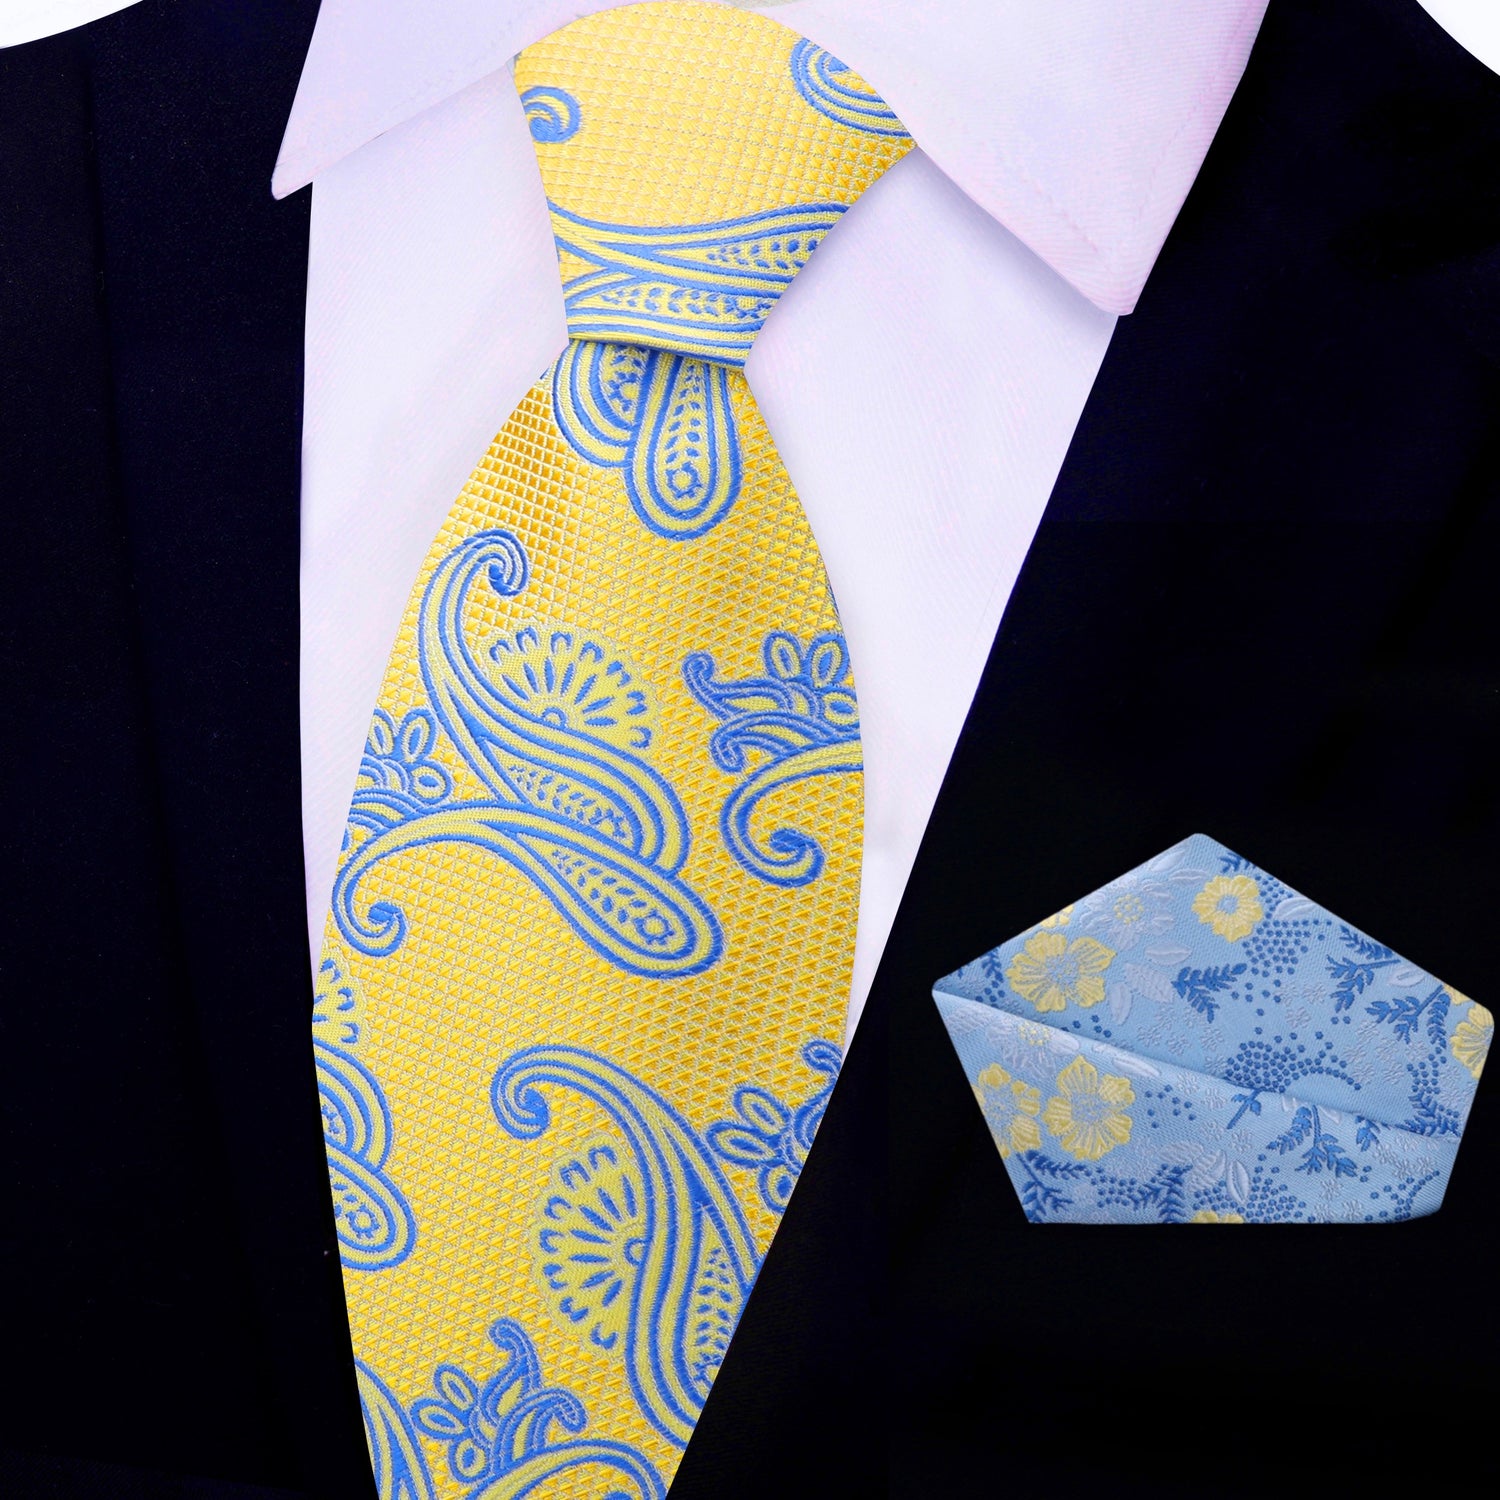 View 2: Yellow and Light Blue Paisley Tie and Light Blue, Yellow Floral Square